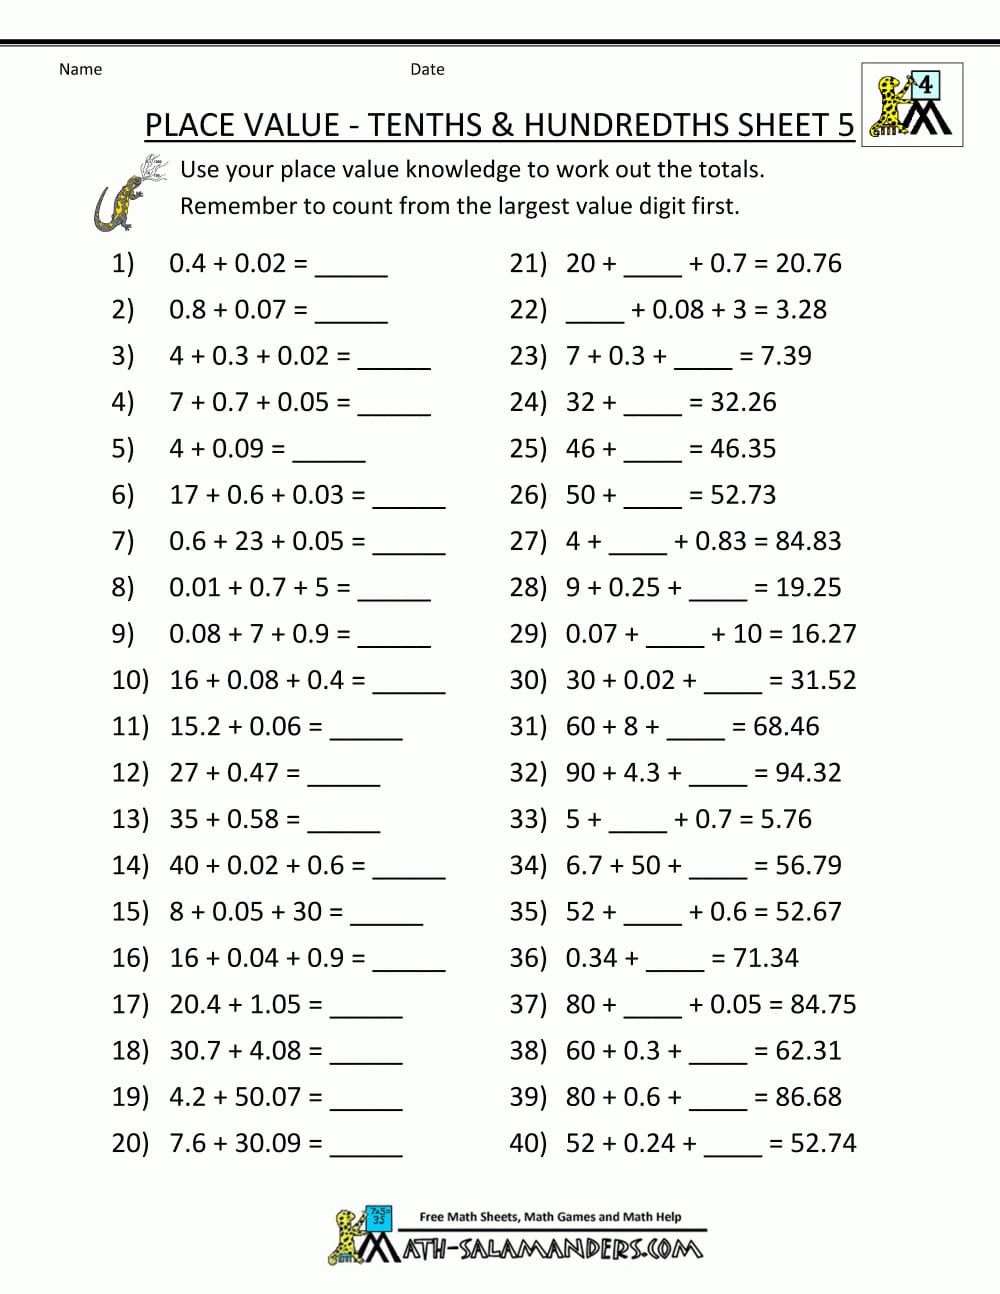 Place Value Worksheets 4Th Grade Db excel